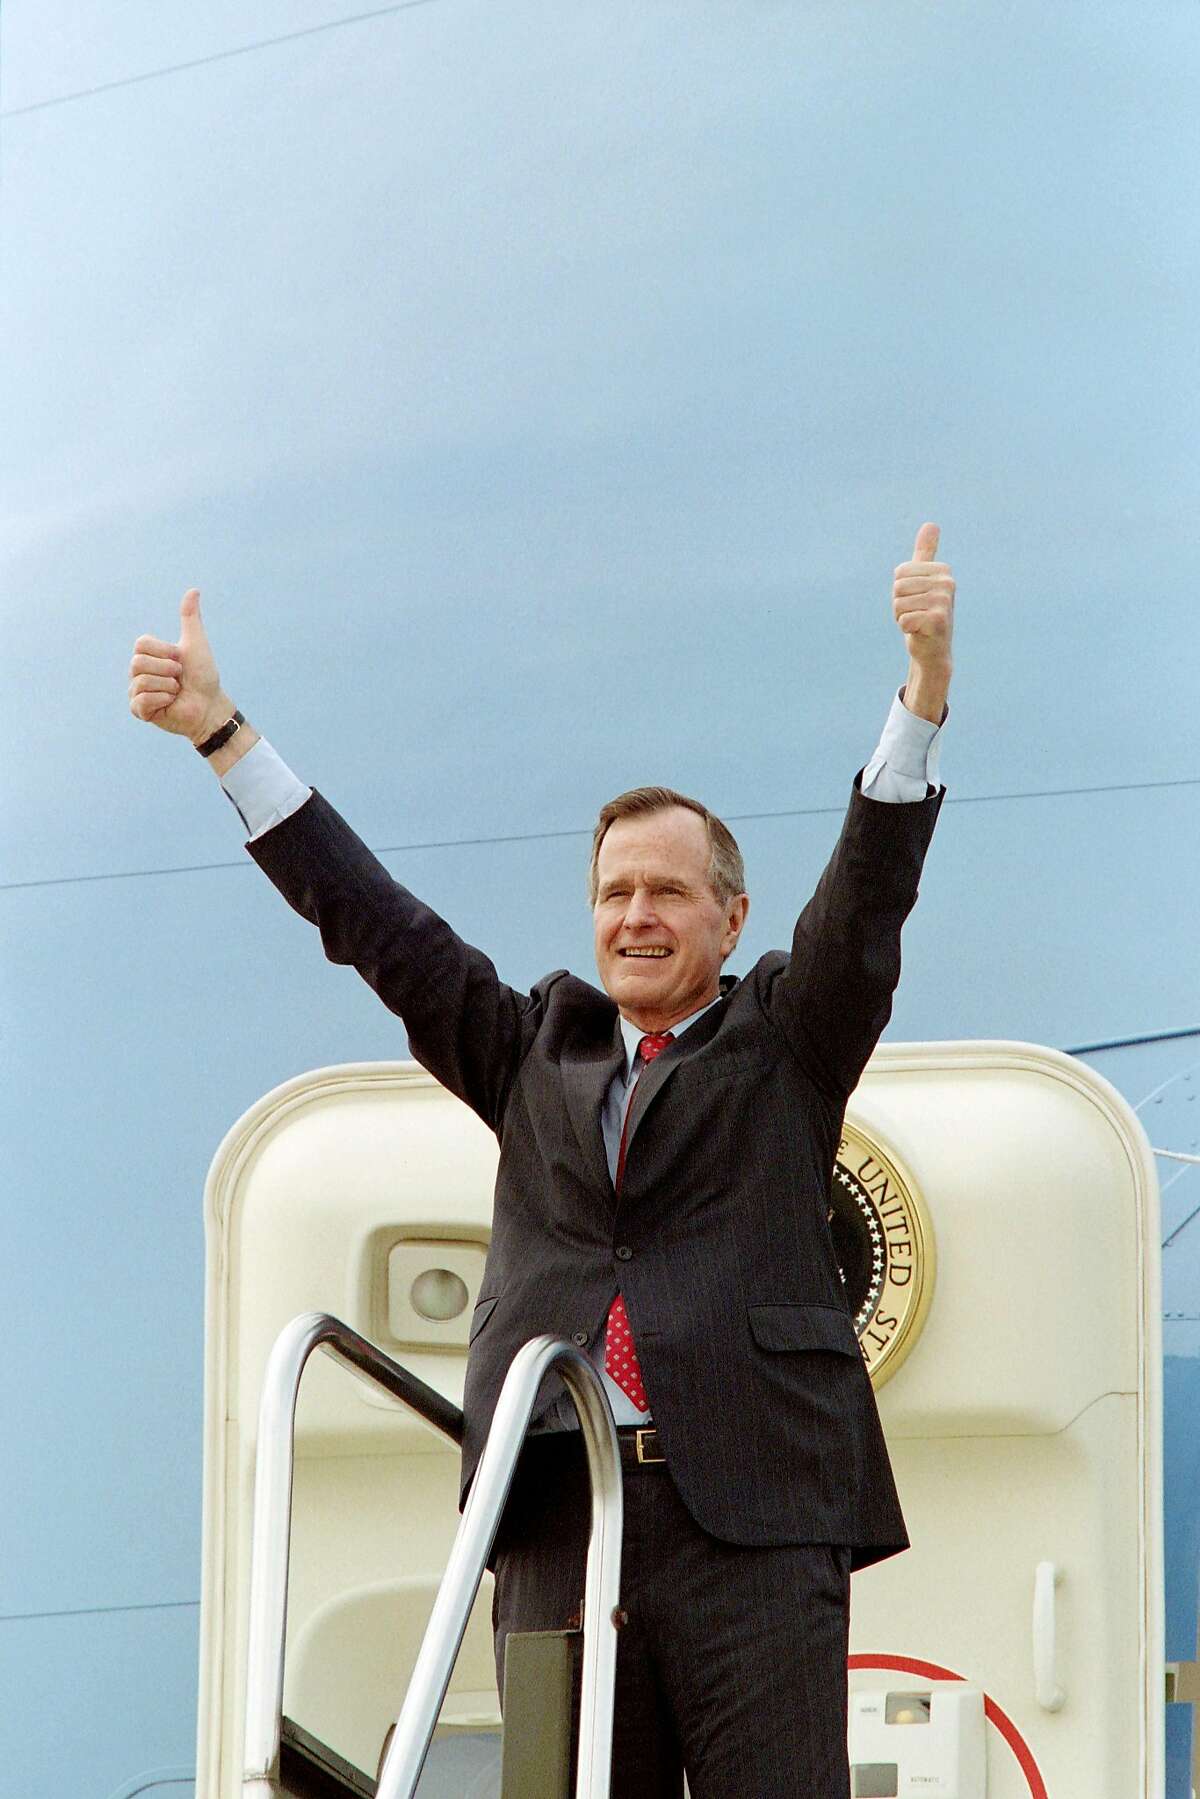 (FILES) In this file photo taken on March 05, 1992 US President George Bush acknowledges the crowd gathered at Columbia Metropolitan Airport with a thumbs-up as he boards Air Force One upon his departure. - Former US president George H.W. Bush, who helped steer America through the end of the Cold War, has died at age 94, his family announced late Friday November 30, 2018. "Jeb, Neil, Marvin, Doro and I are saddened to announce that after 94 remarkable years, our dear Dad has died," his son, former president George W. Bush, said in a statement released on Twitter by a family spokesman. (Photo by Luke FRAZZA / AFP)LUKE FRAZZA/AFP/Getty Images